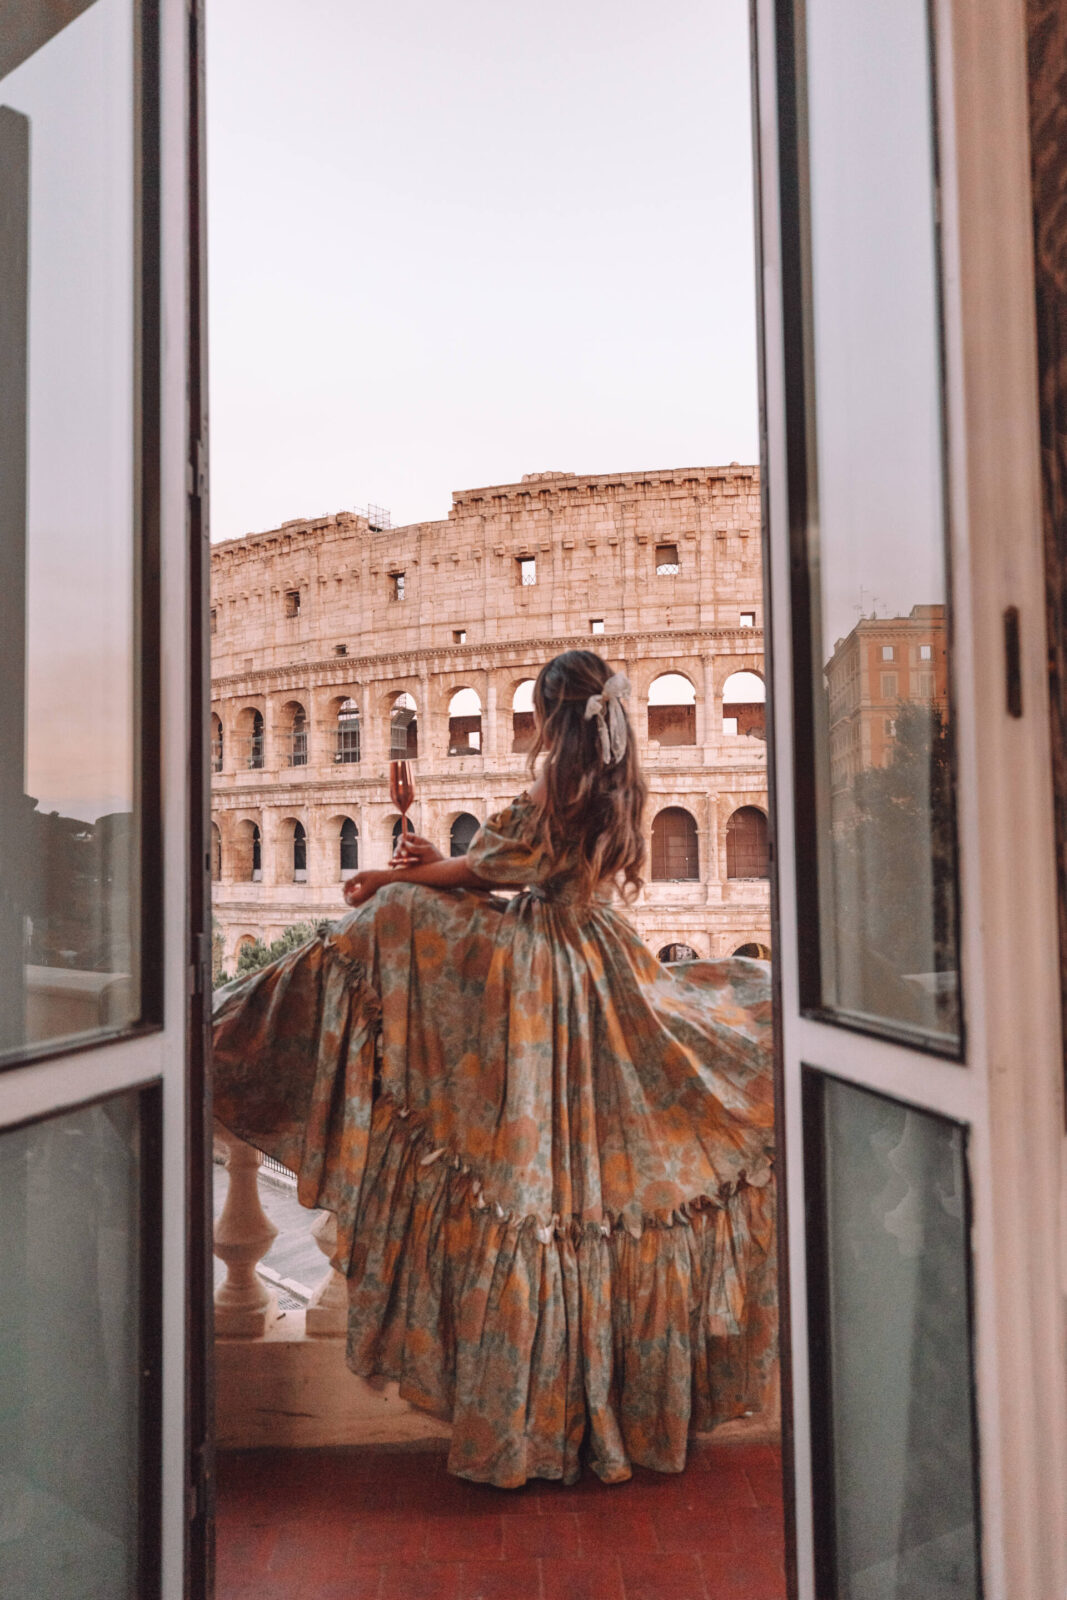 the most gorgeous view of the colosseum from your airbnb balcony. a must stay while in italy! unique airbnb, europe, travel